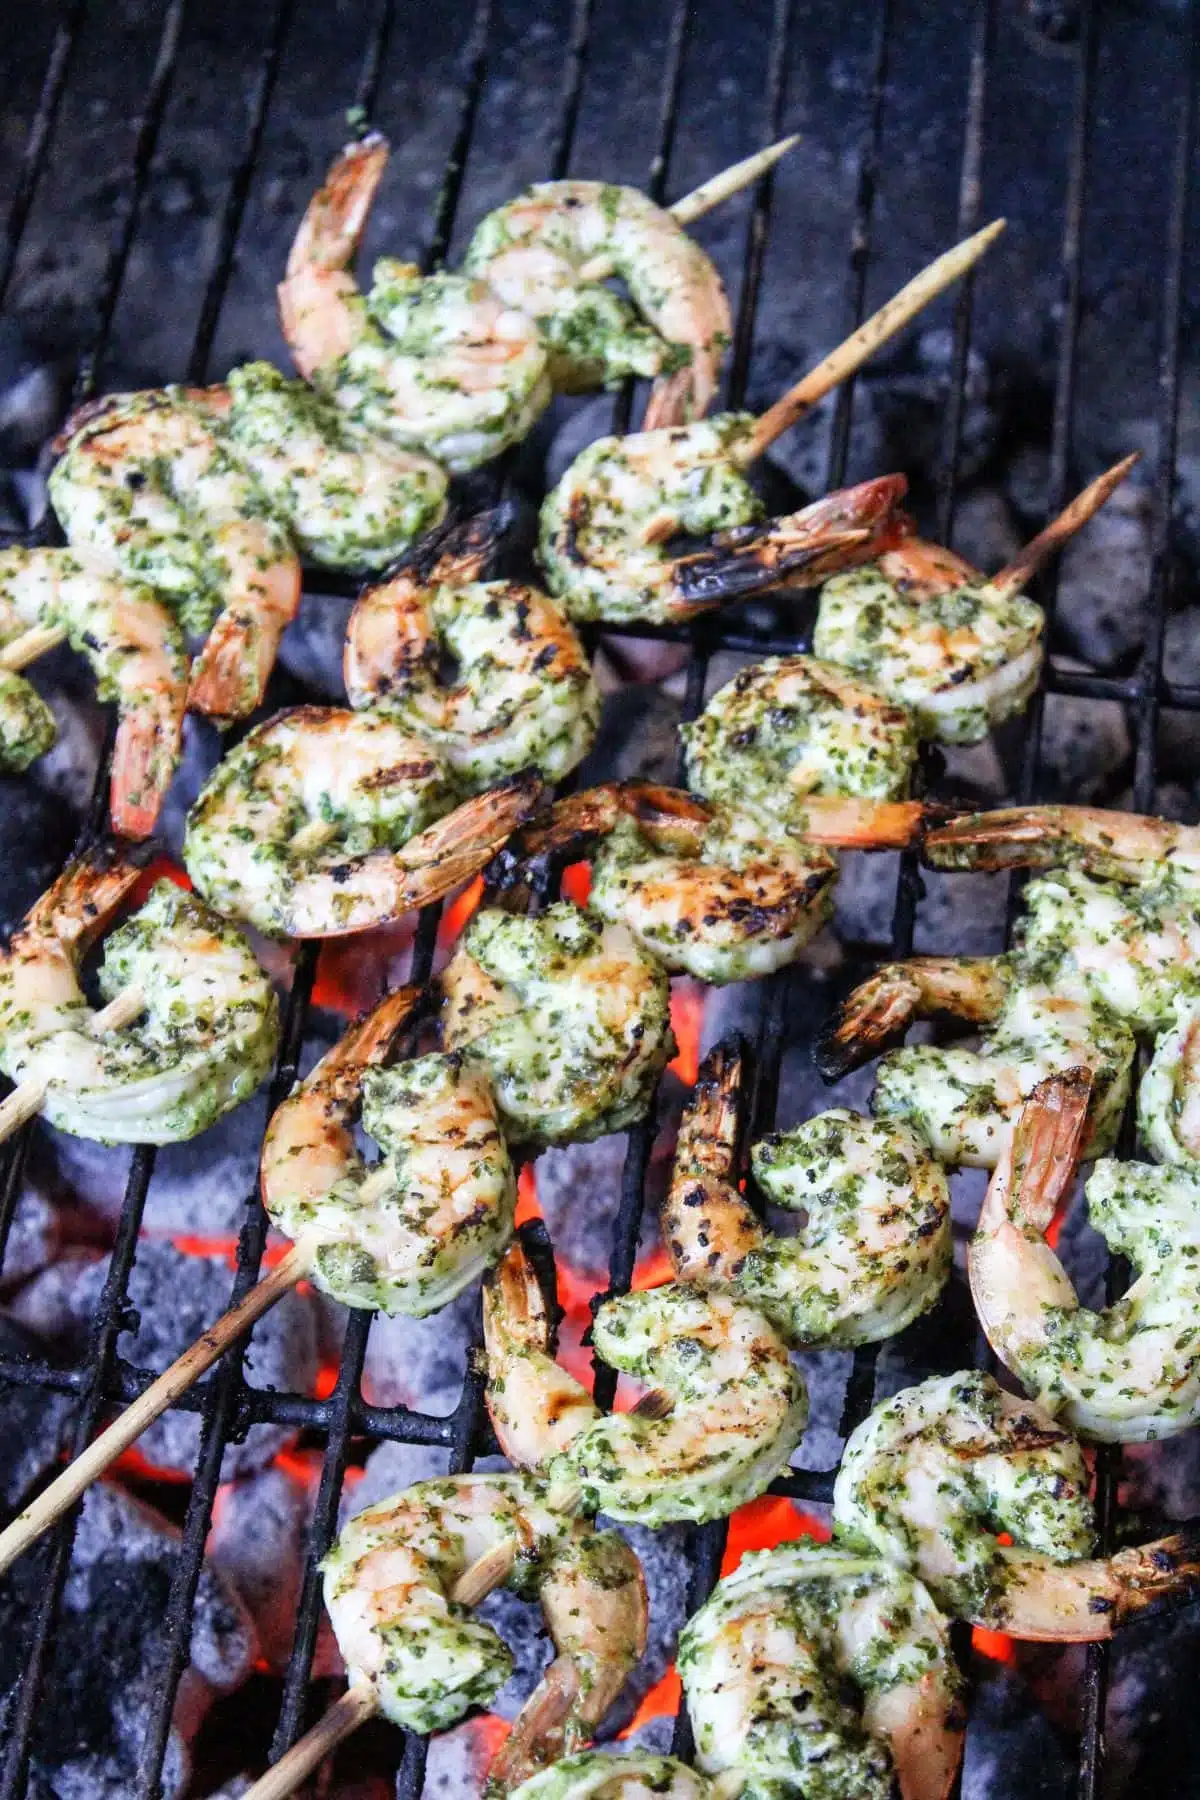 Grilled shrimp skewers with herb seasoning cooking over a charcoal grill.